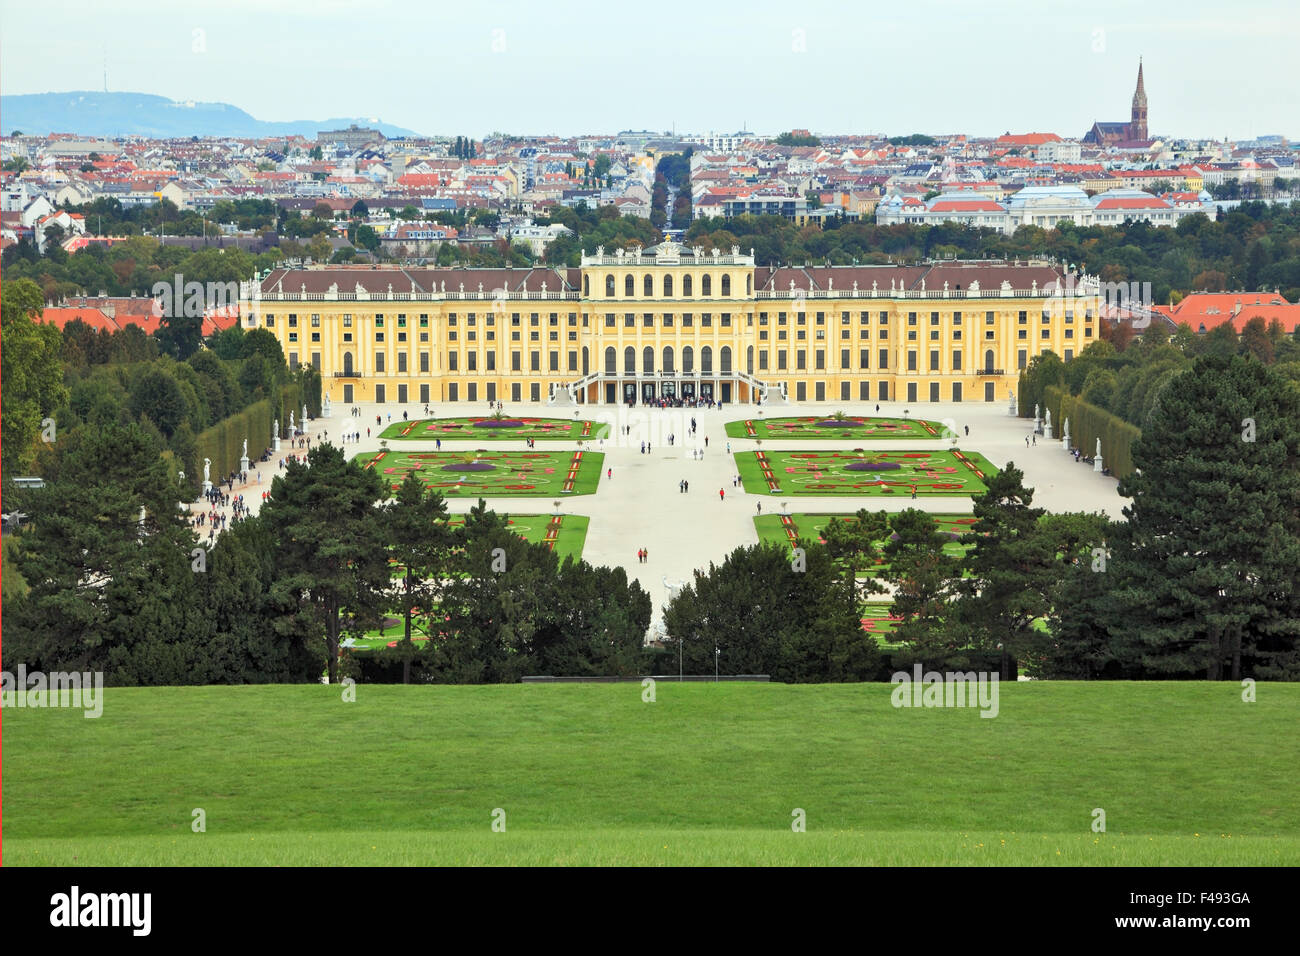 Palace and flower beds in the spacious area Stock Photo